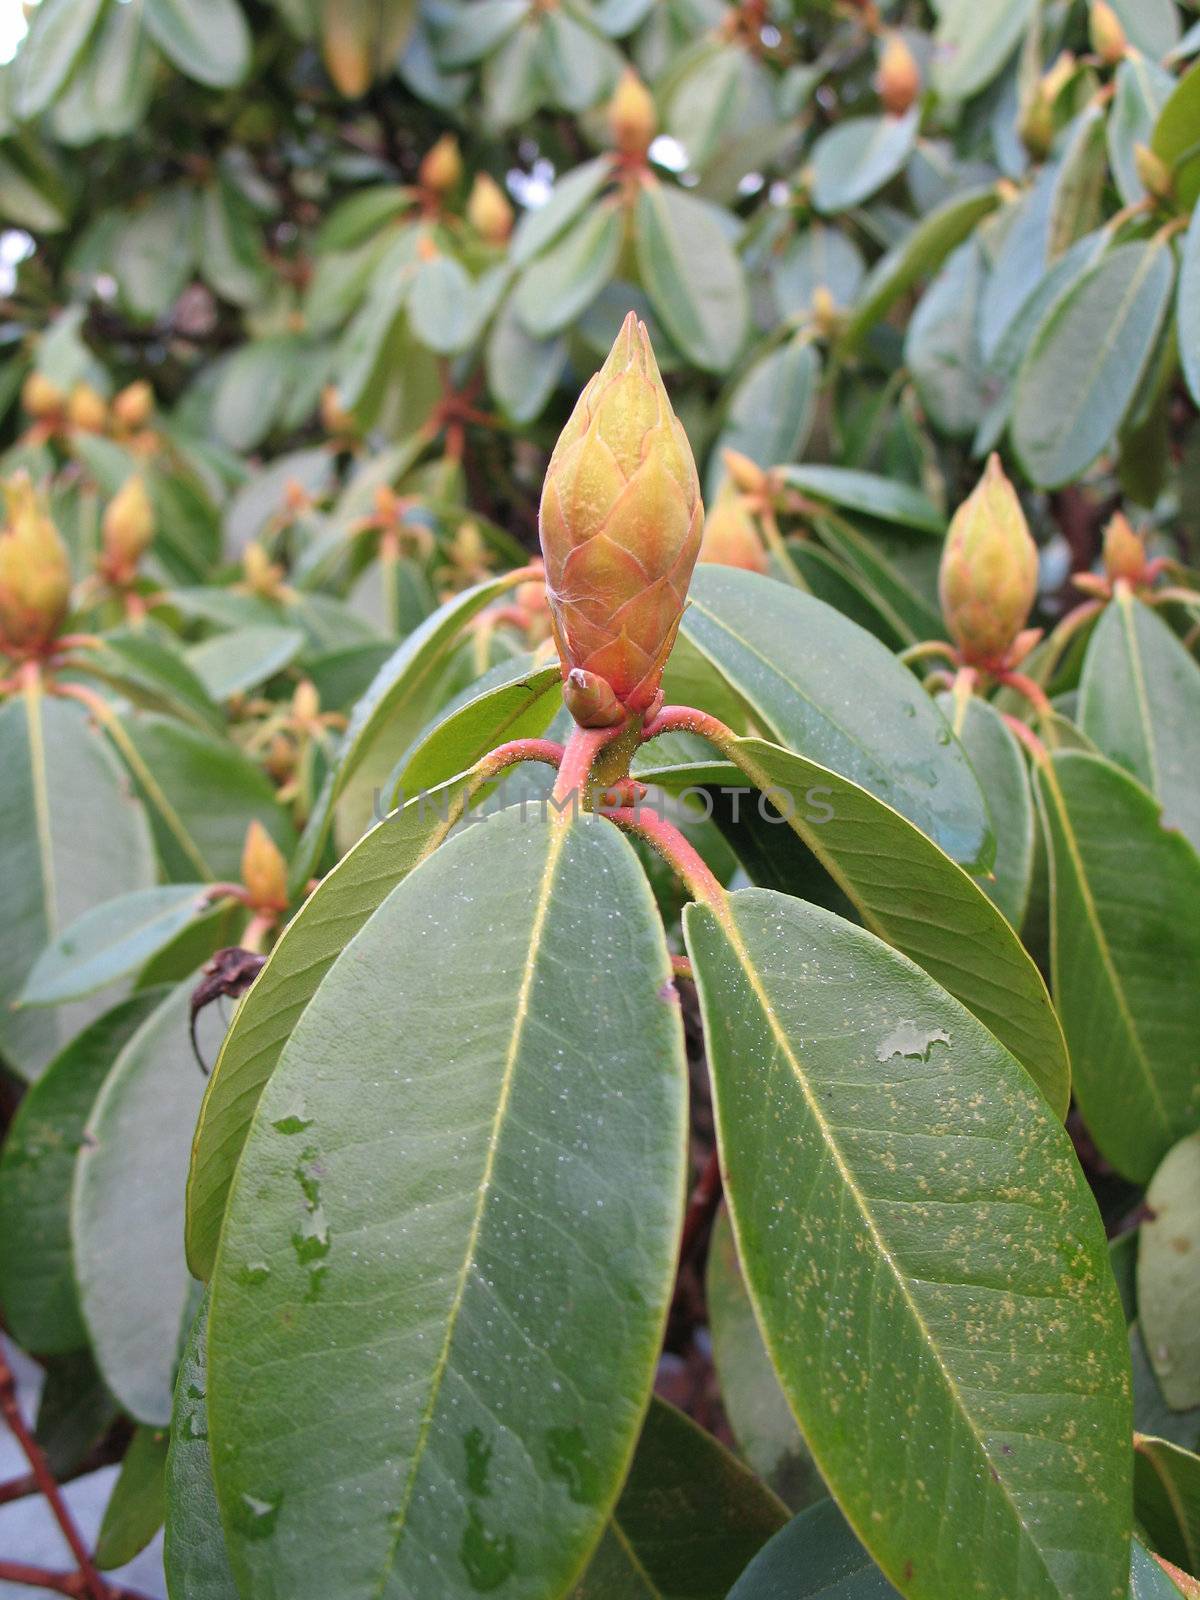 rhododendron flower buds by mmm